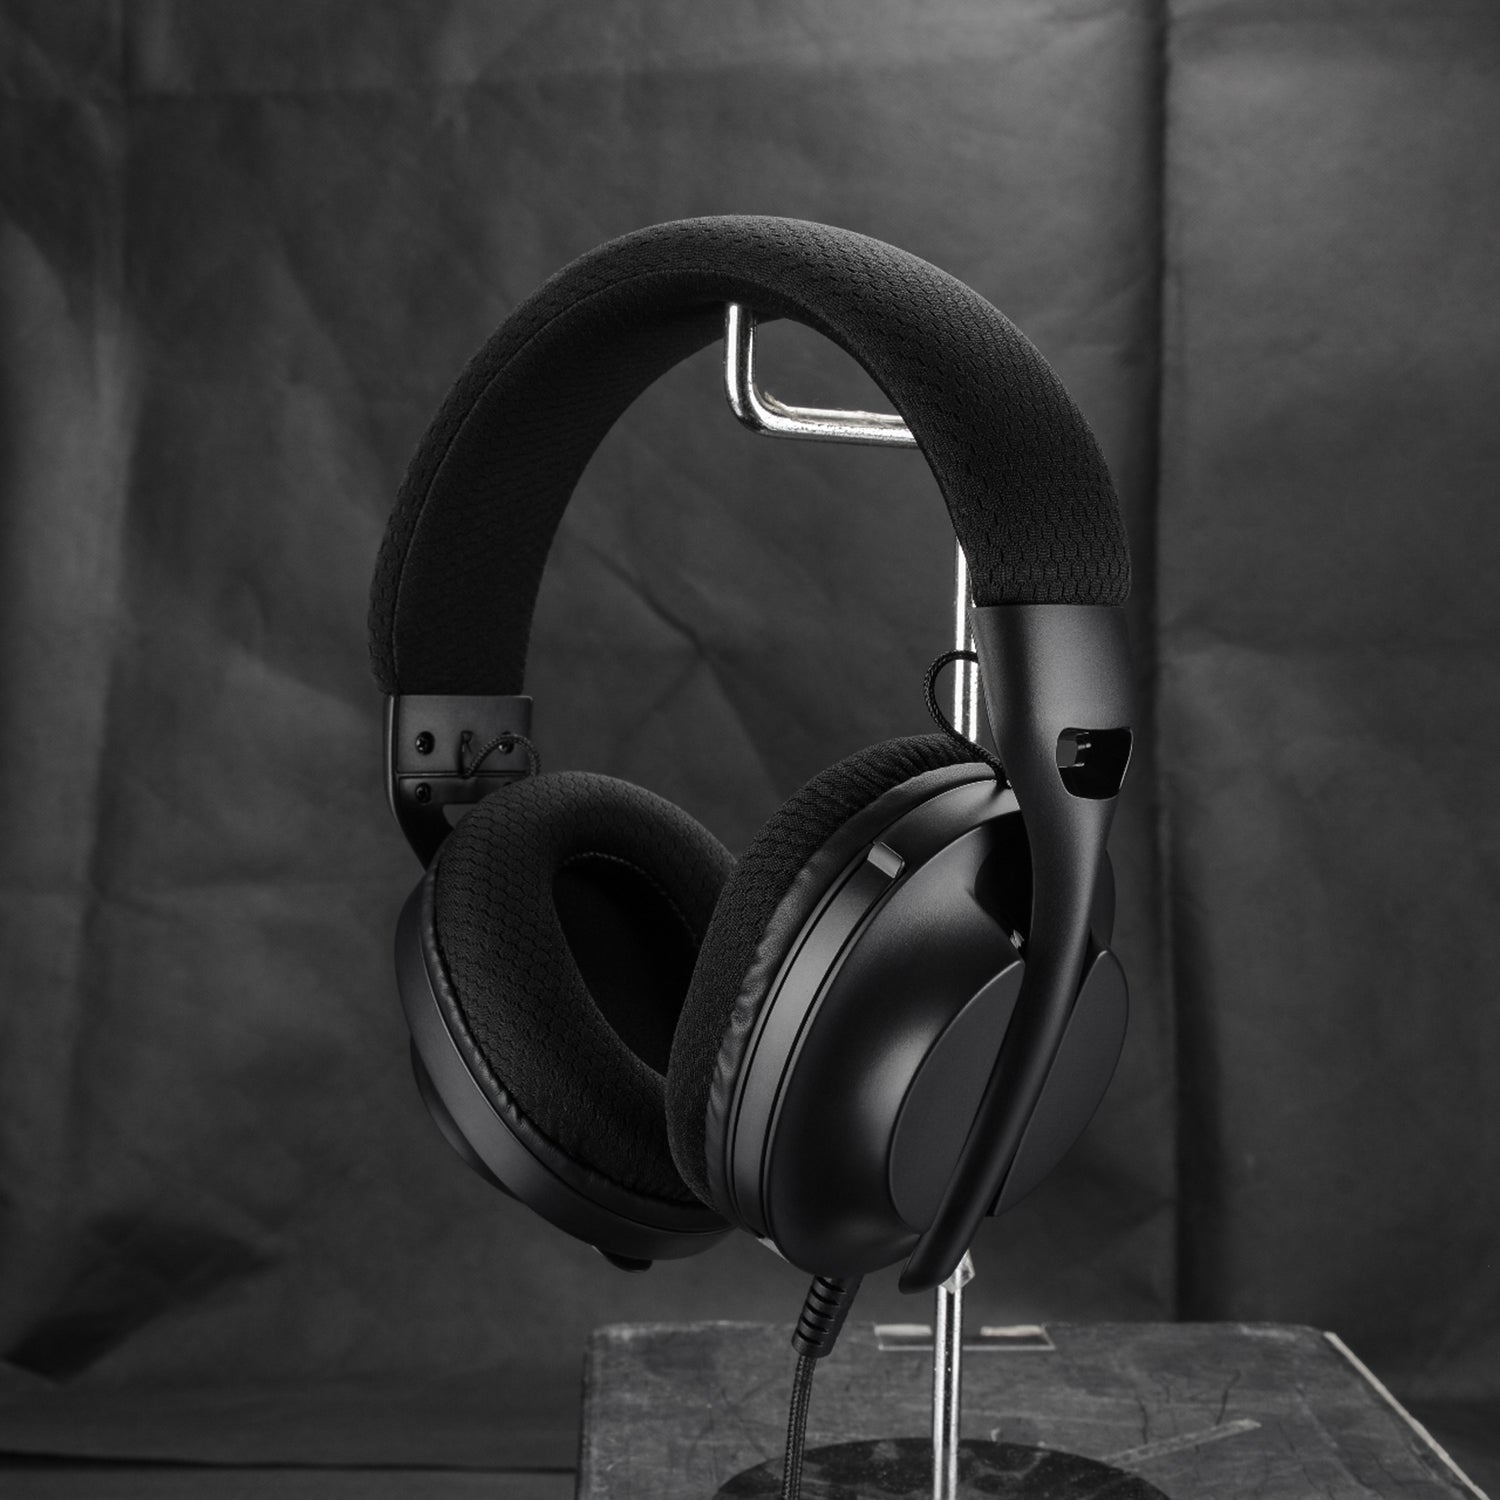 M360 Triple Connect Gaming Headset In Black with Microphone Down Tilted On Headset Stand